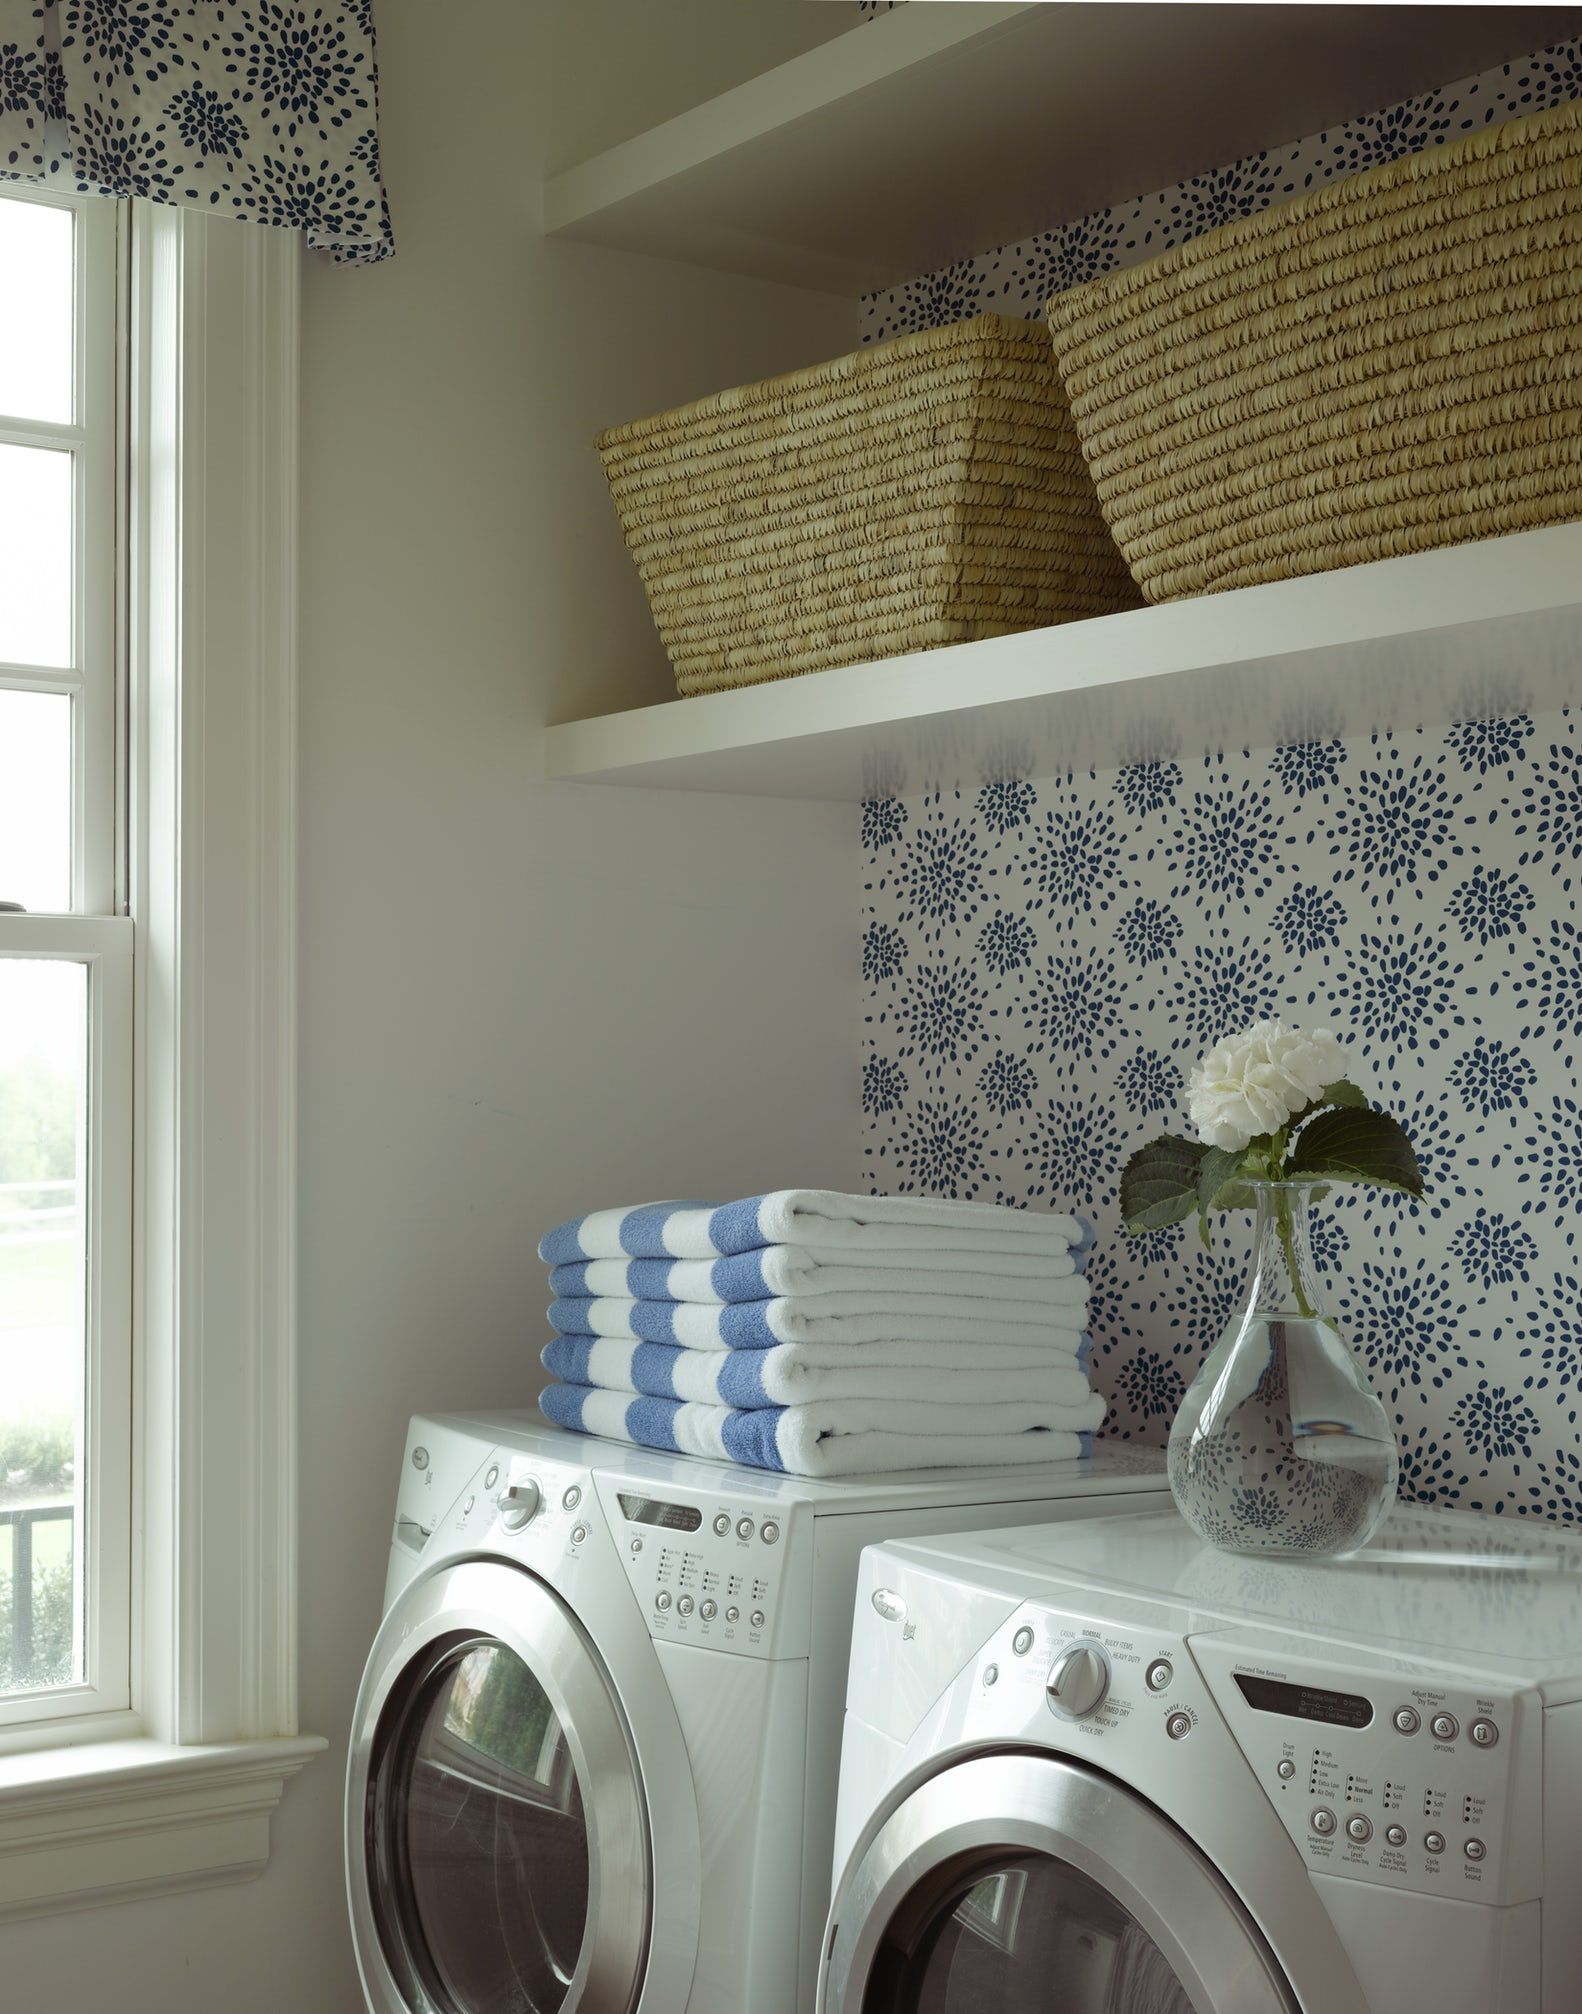 17 Laundry Room Wallpaper Ideas to Spruce Up the Drabness